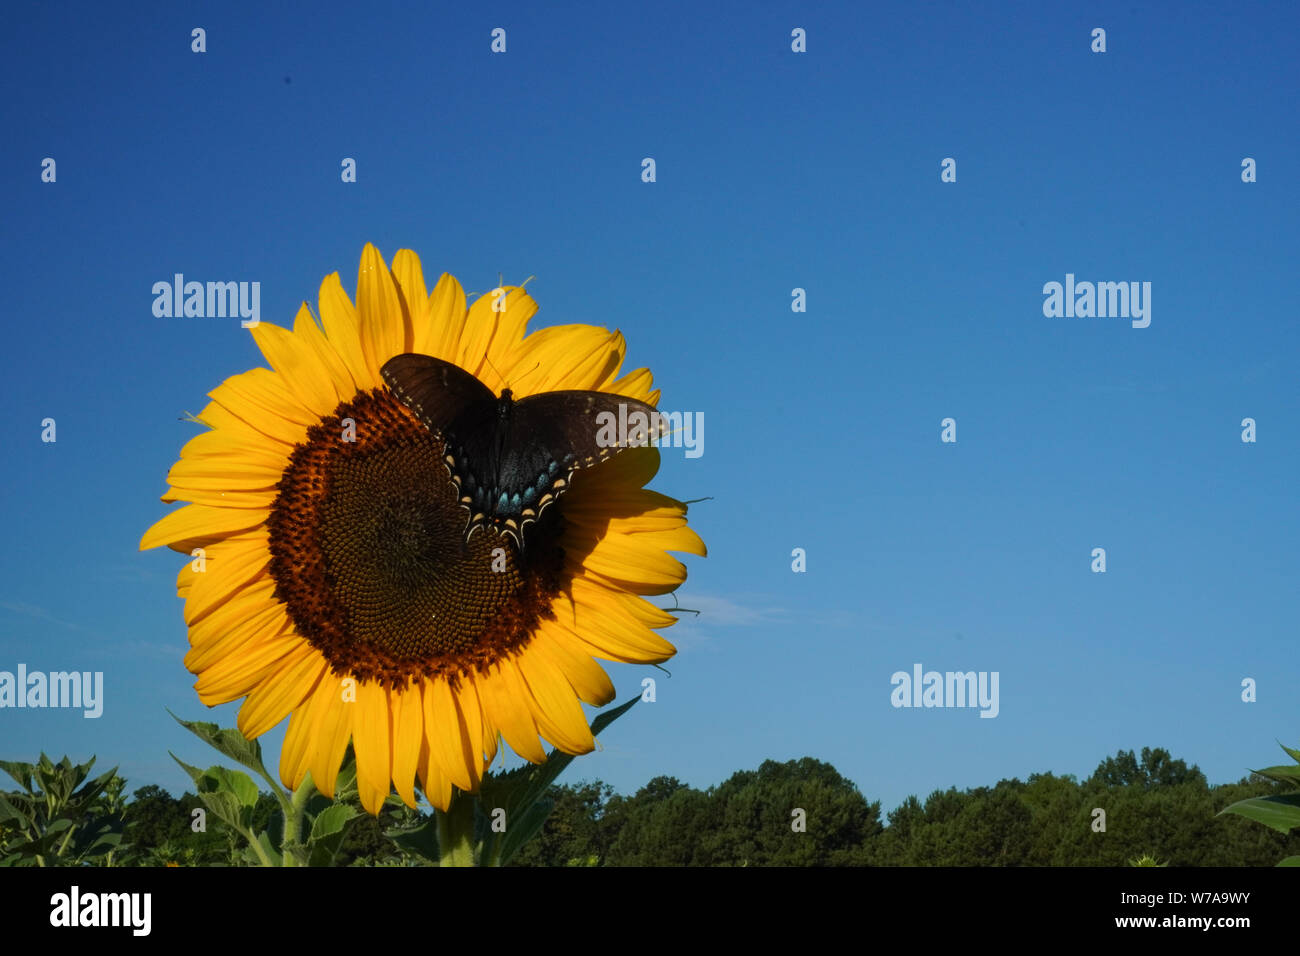 Horizontal image of a butterfly landing on a sunflower with space for text Stock Photo